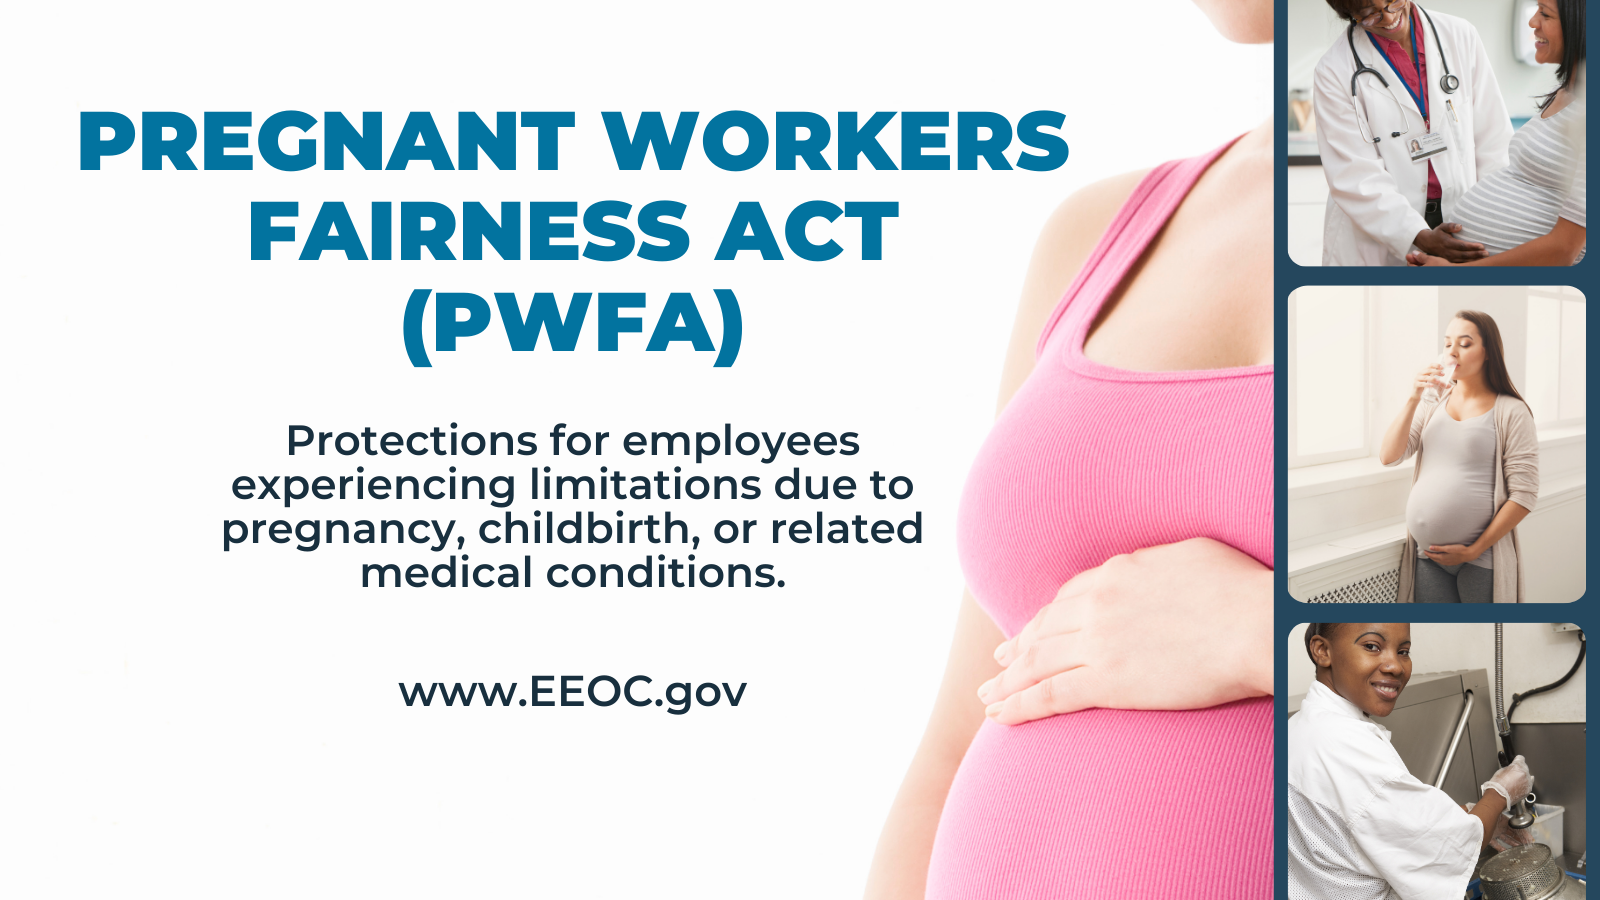 Pregnant Workers Fairness Act (PWFA) Protections for employees experiencing limitations due to pregnancy, childbirth, or related medical conditions. www.EEOC.gov